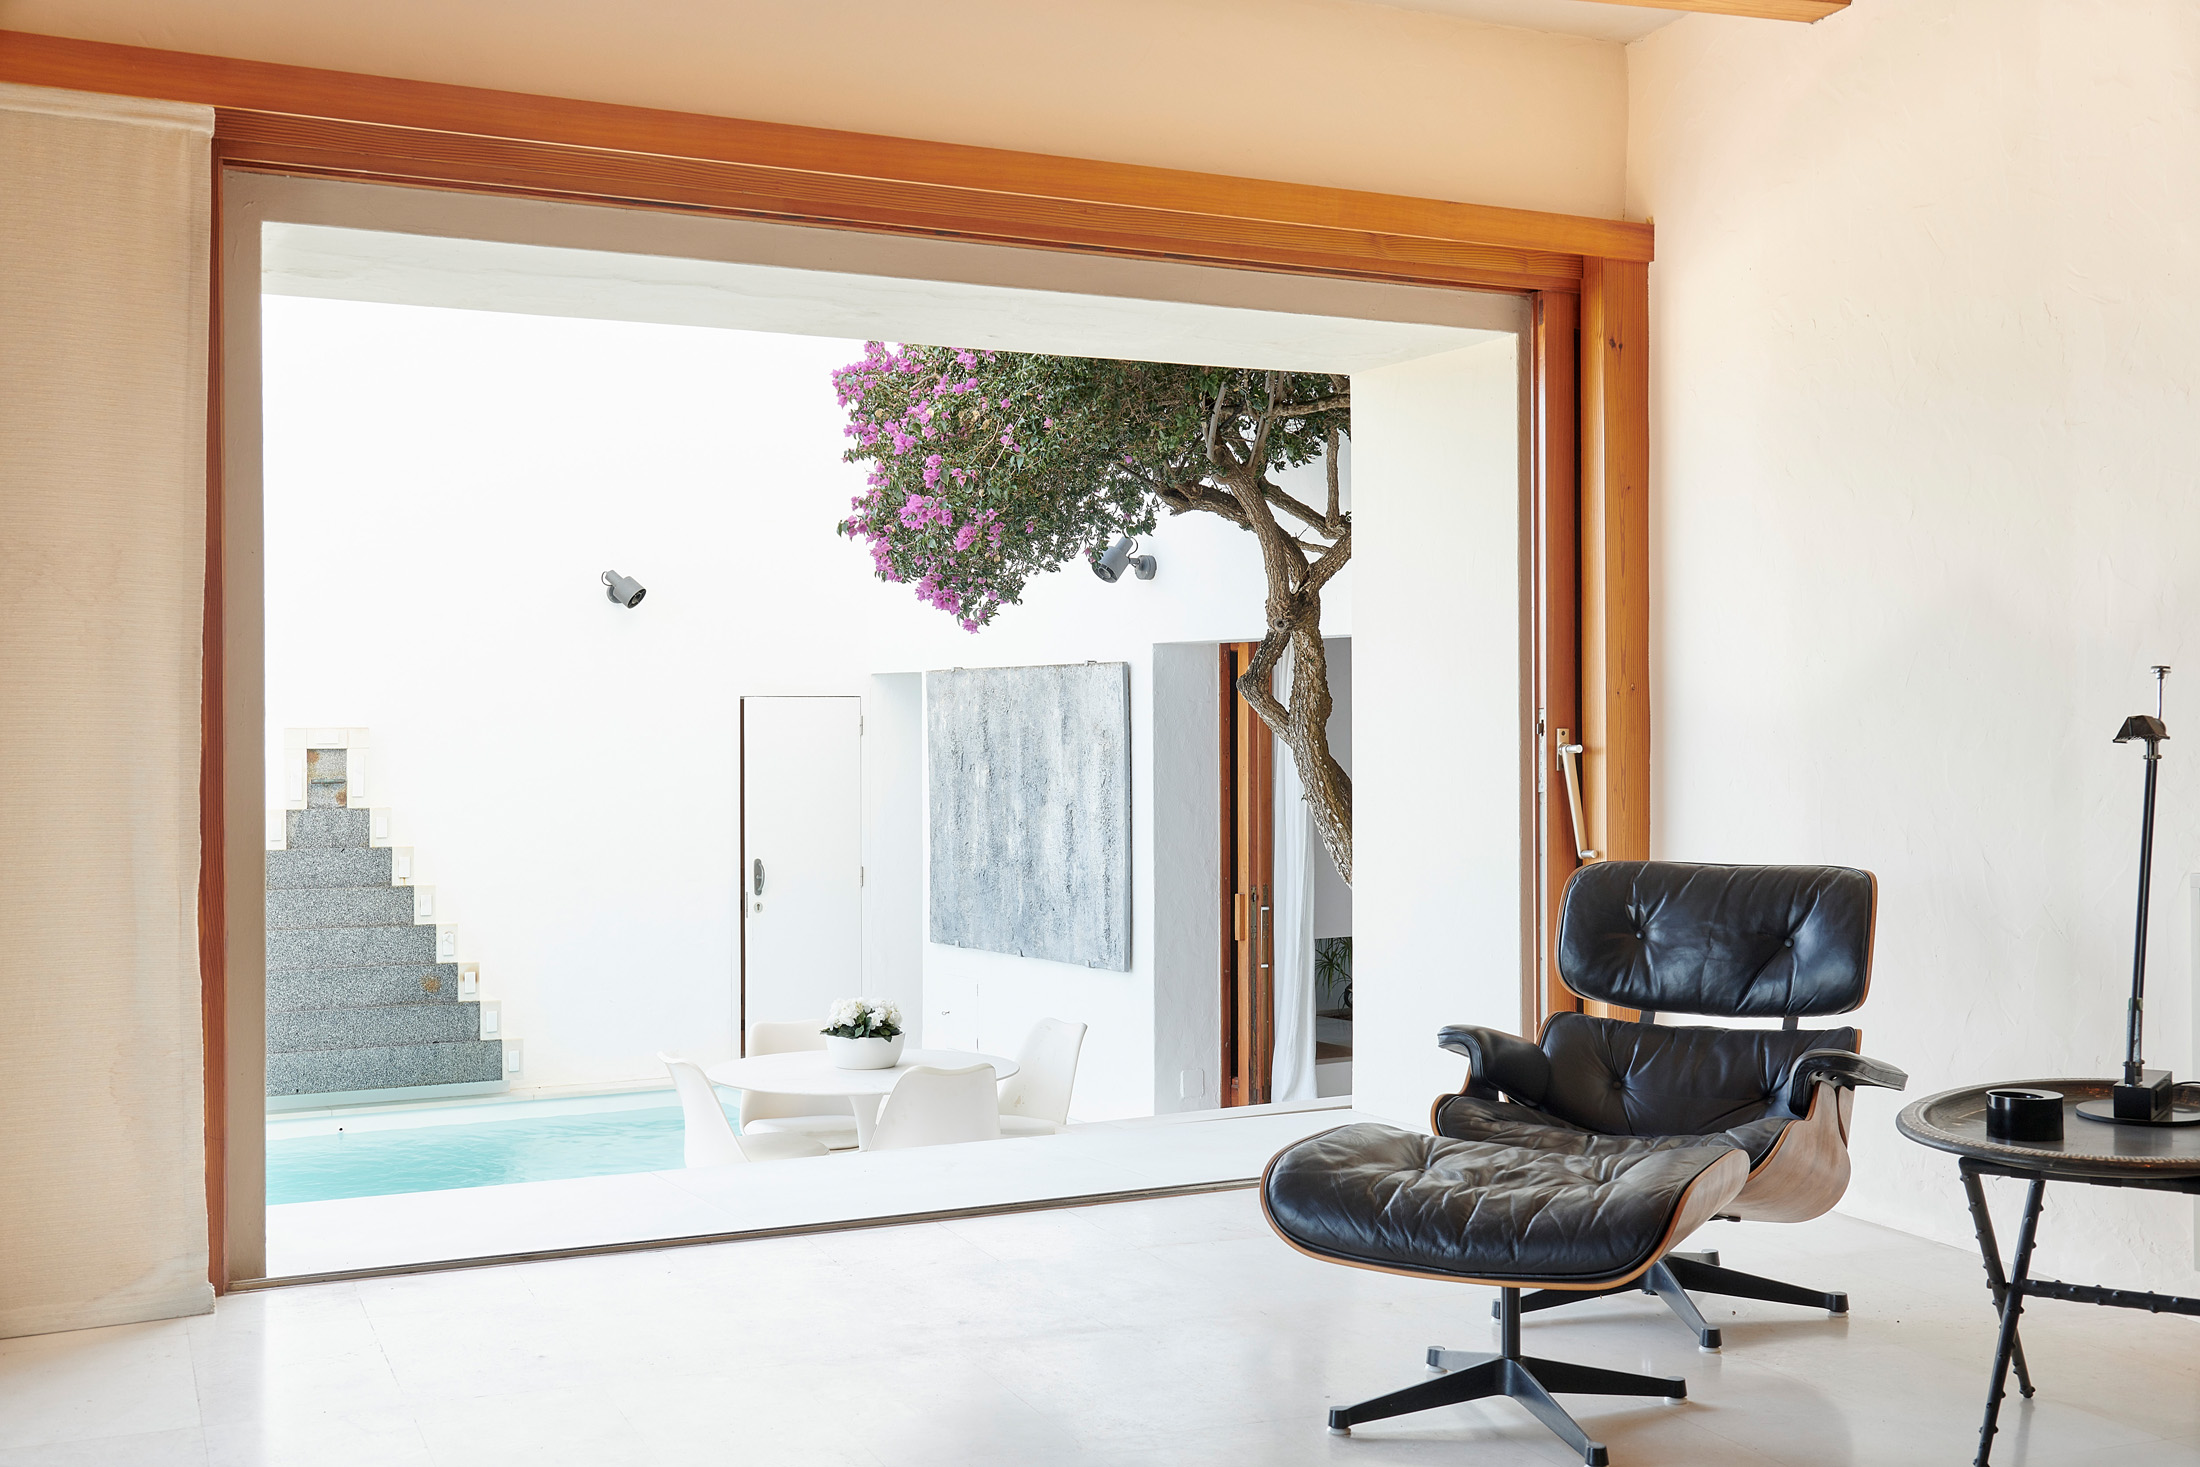 Design-led interior of a luxury townhouse to buy in Ibiza